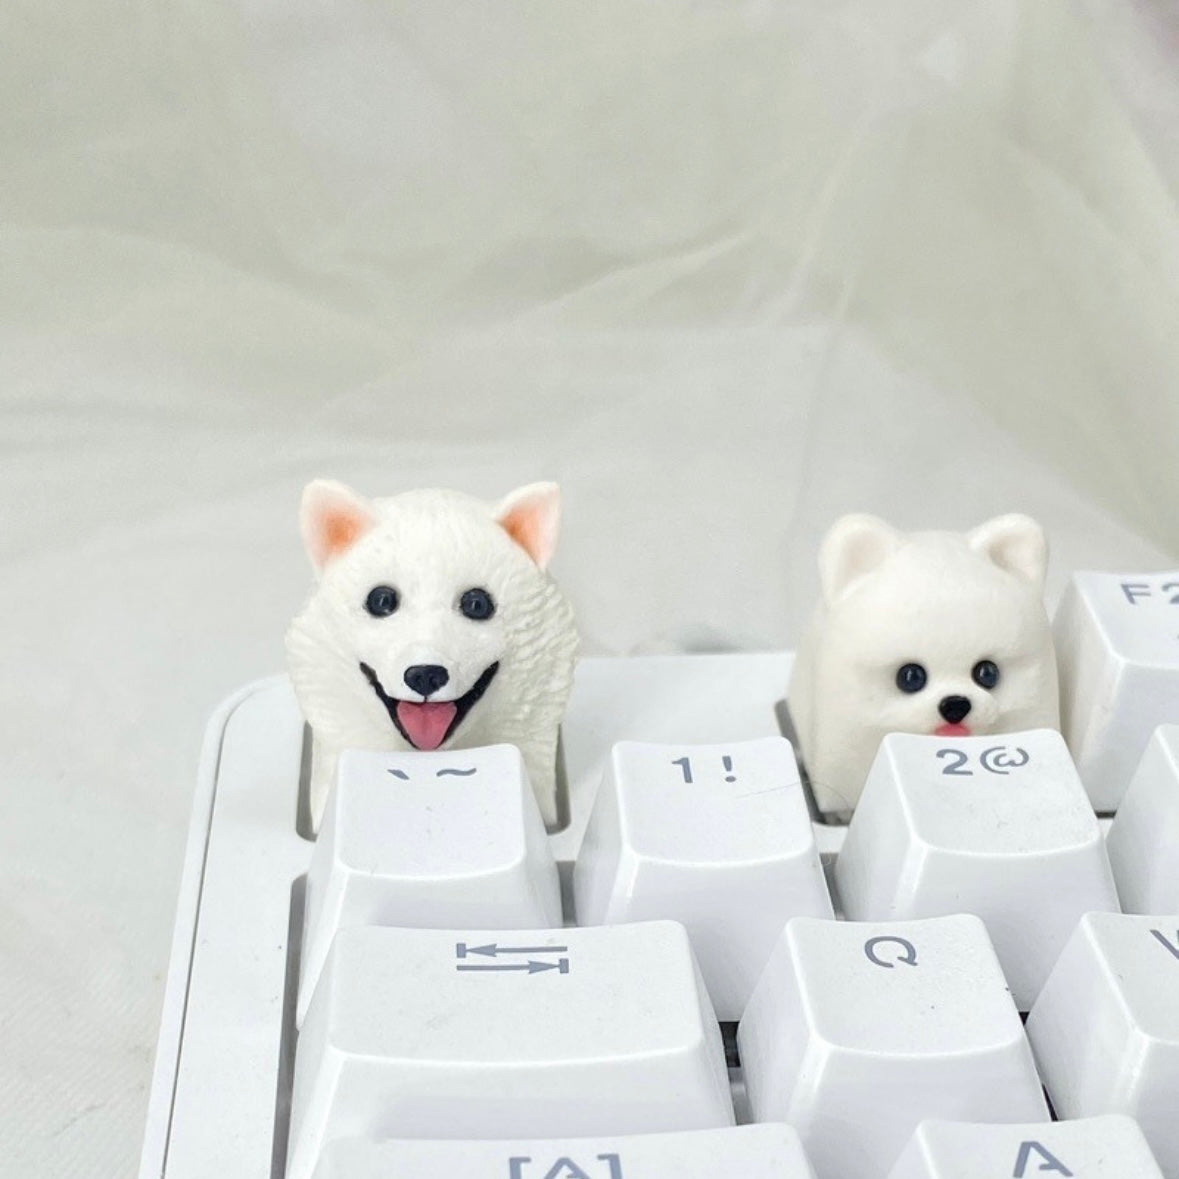 Artisan-Keycaps-for-Cats-and-Dogs-Customize-your-artisan-keycaps_8_